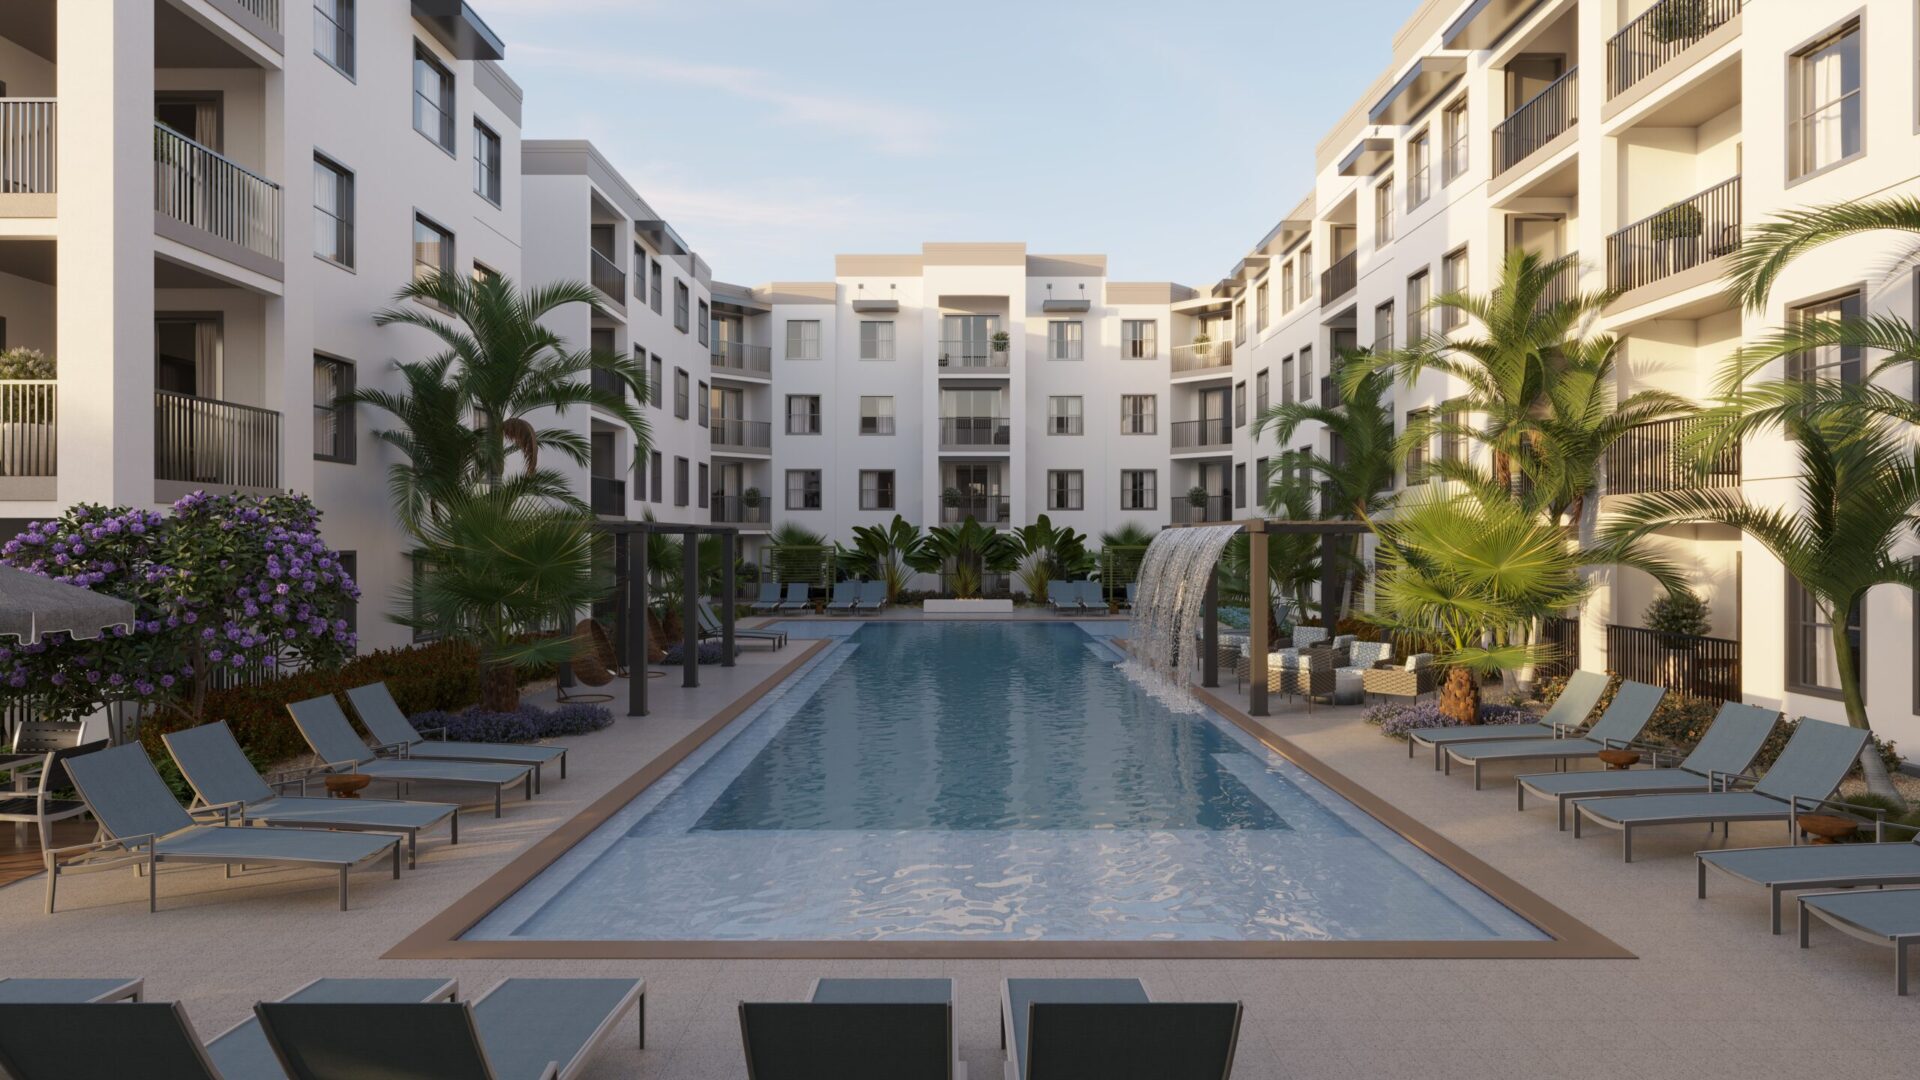 Photorealistic Renderings—A Game Changer for New Development Leasing